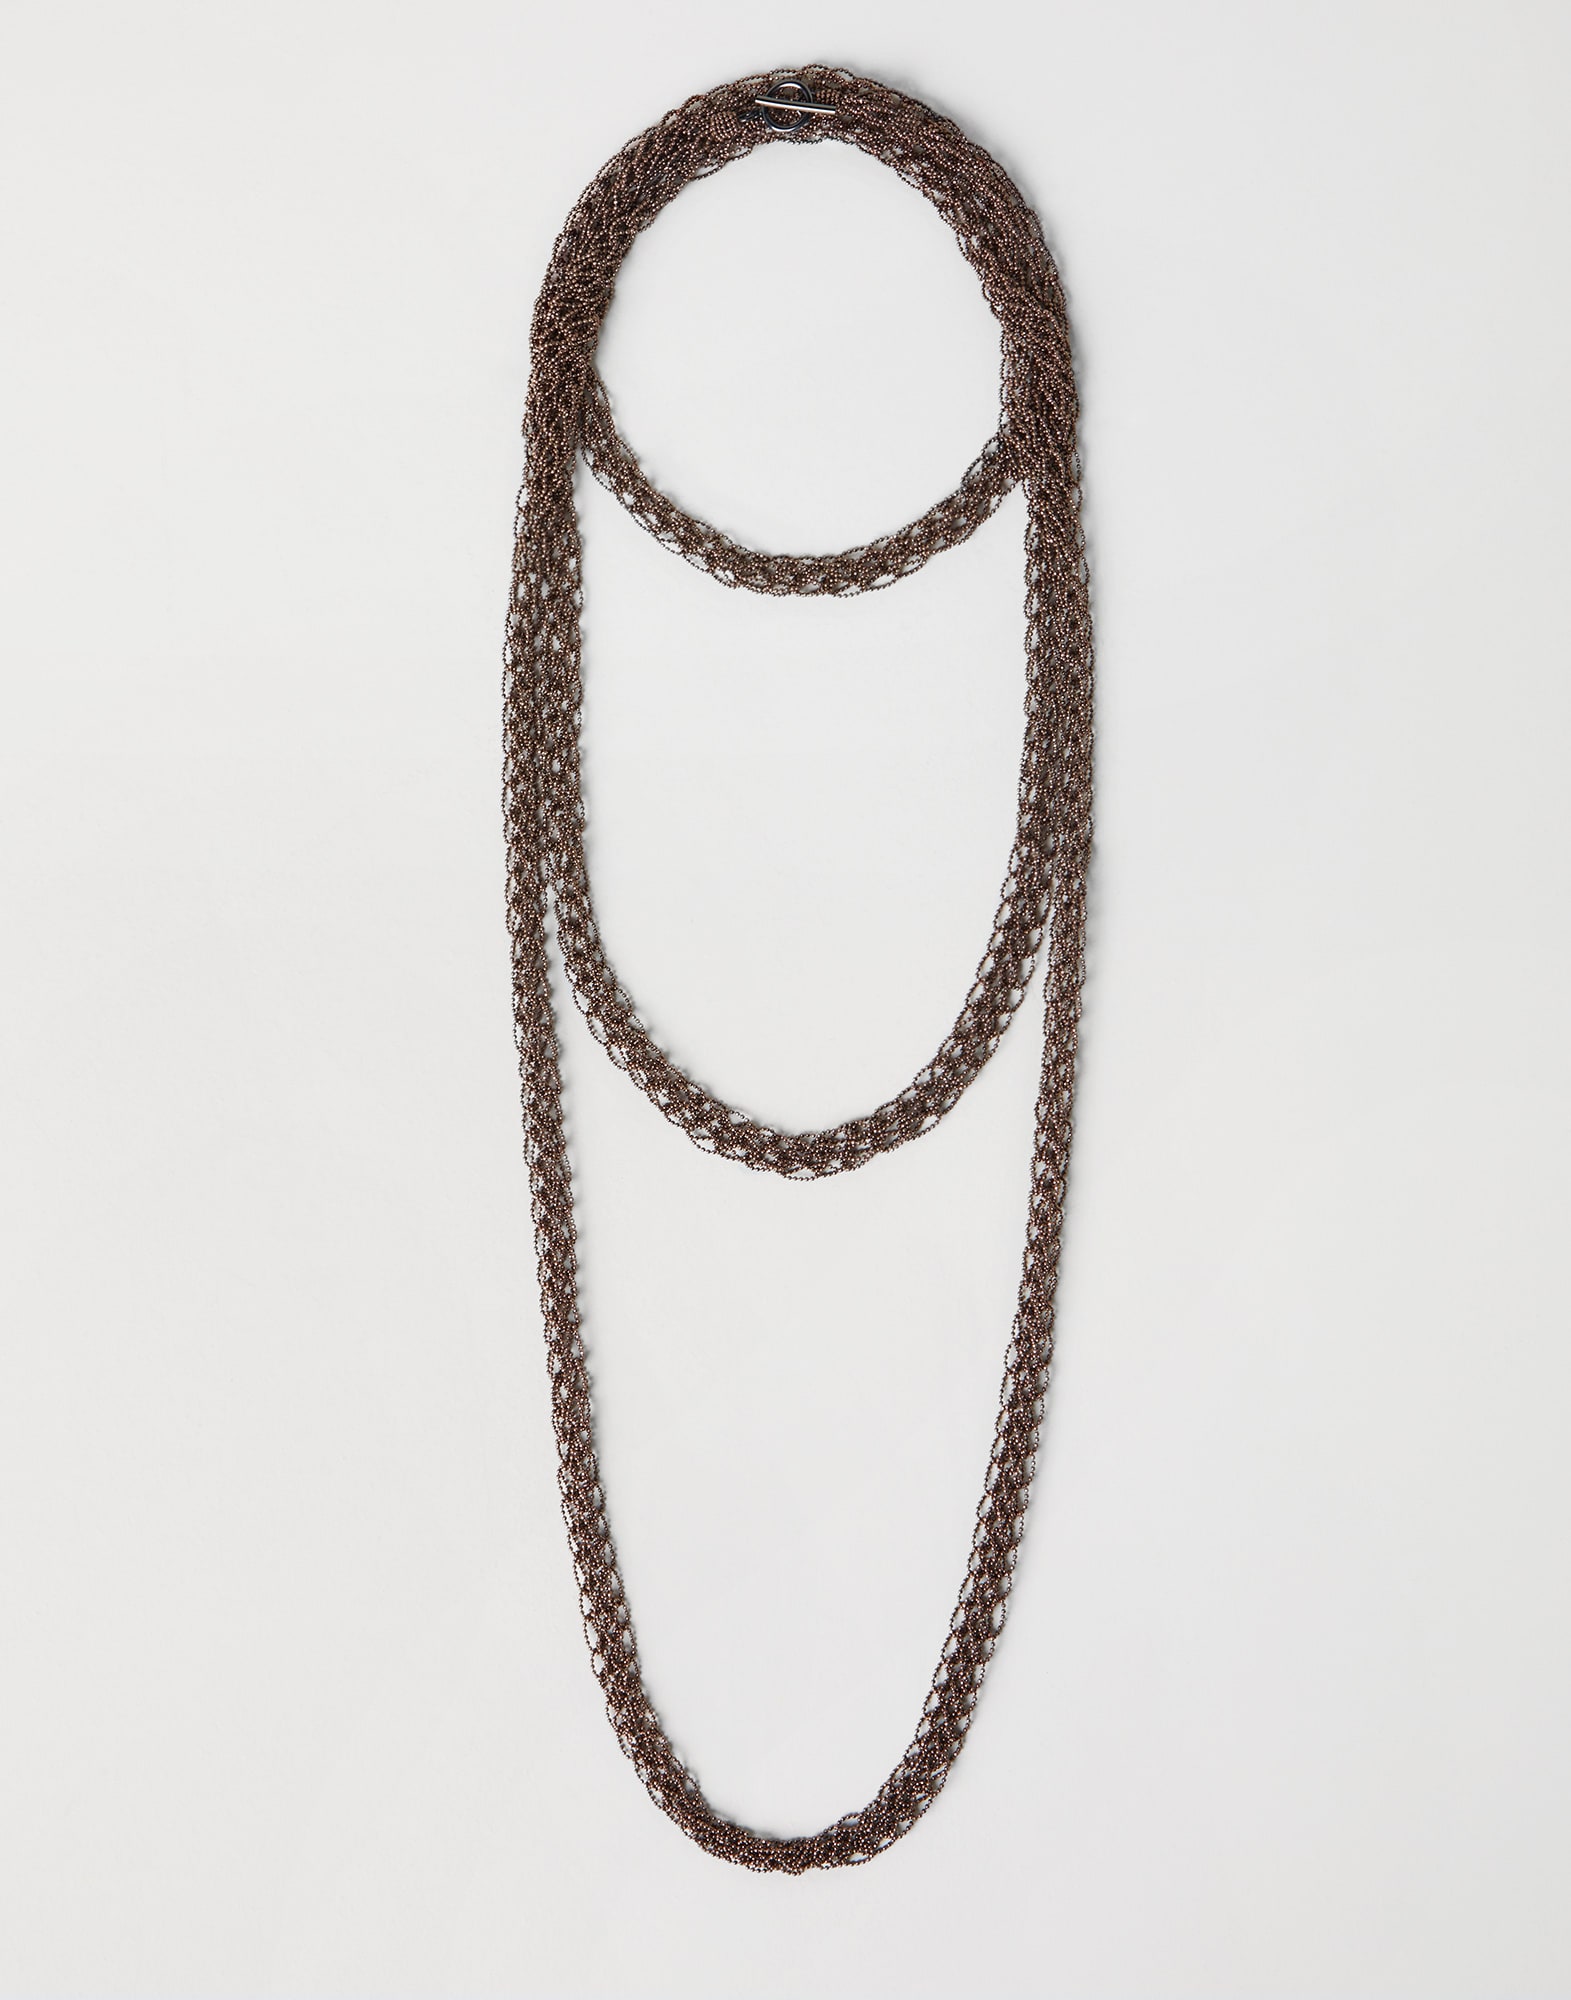 Collier - Vue frontale